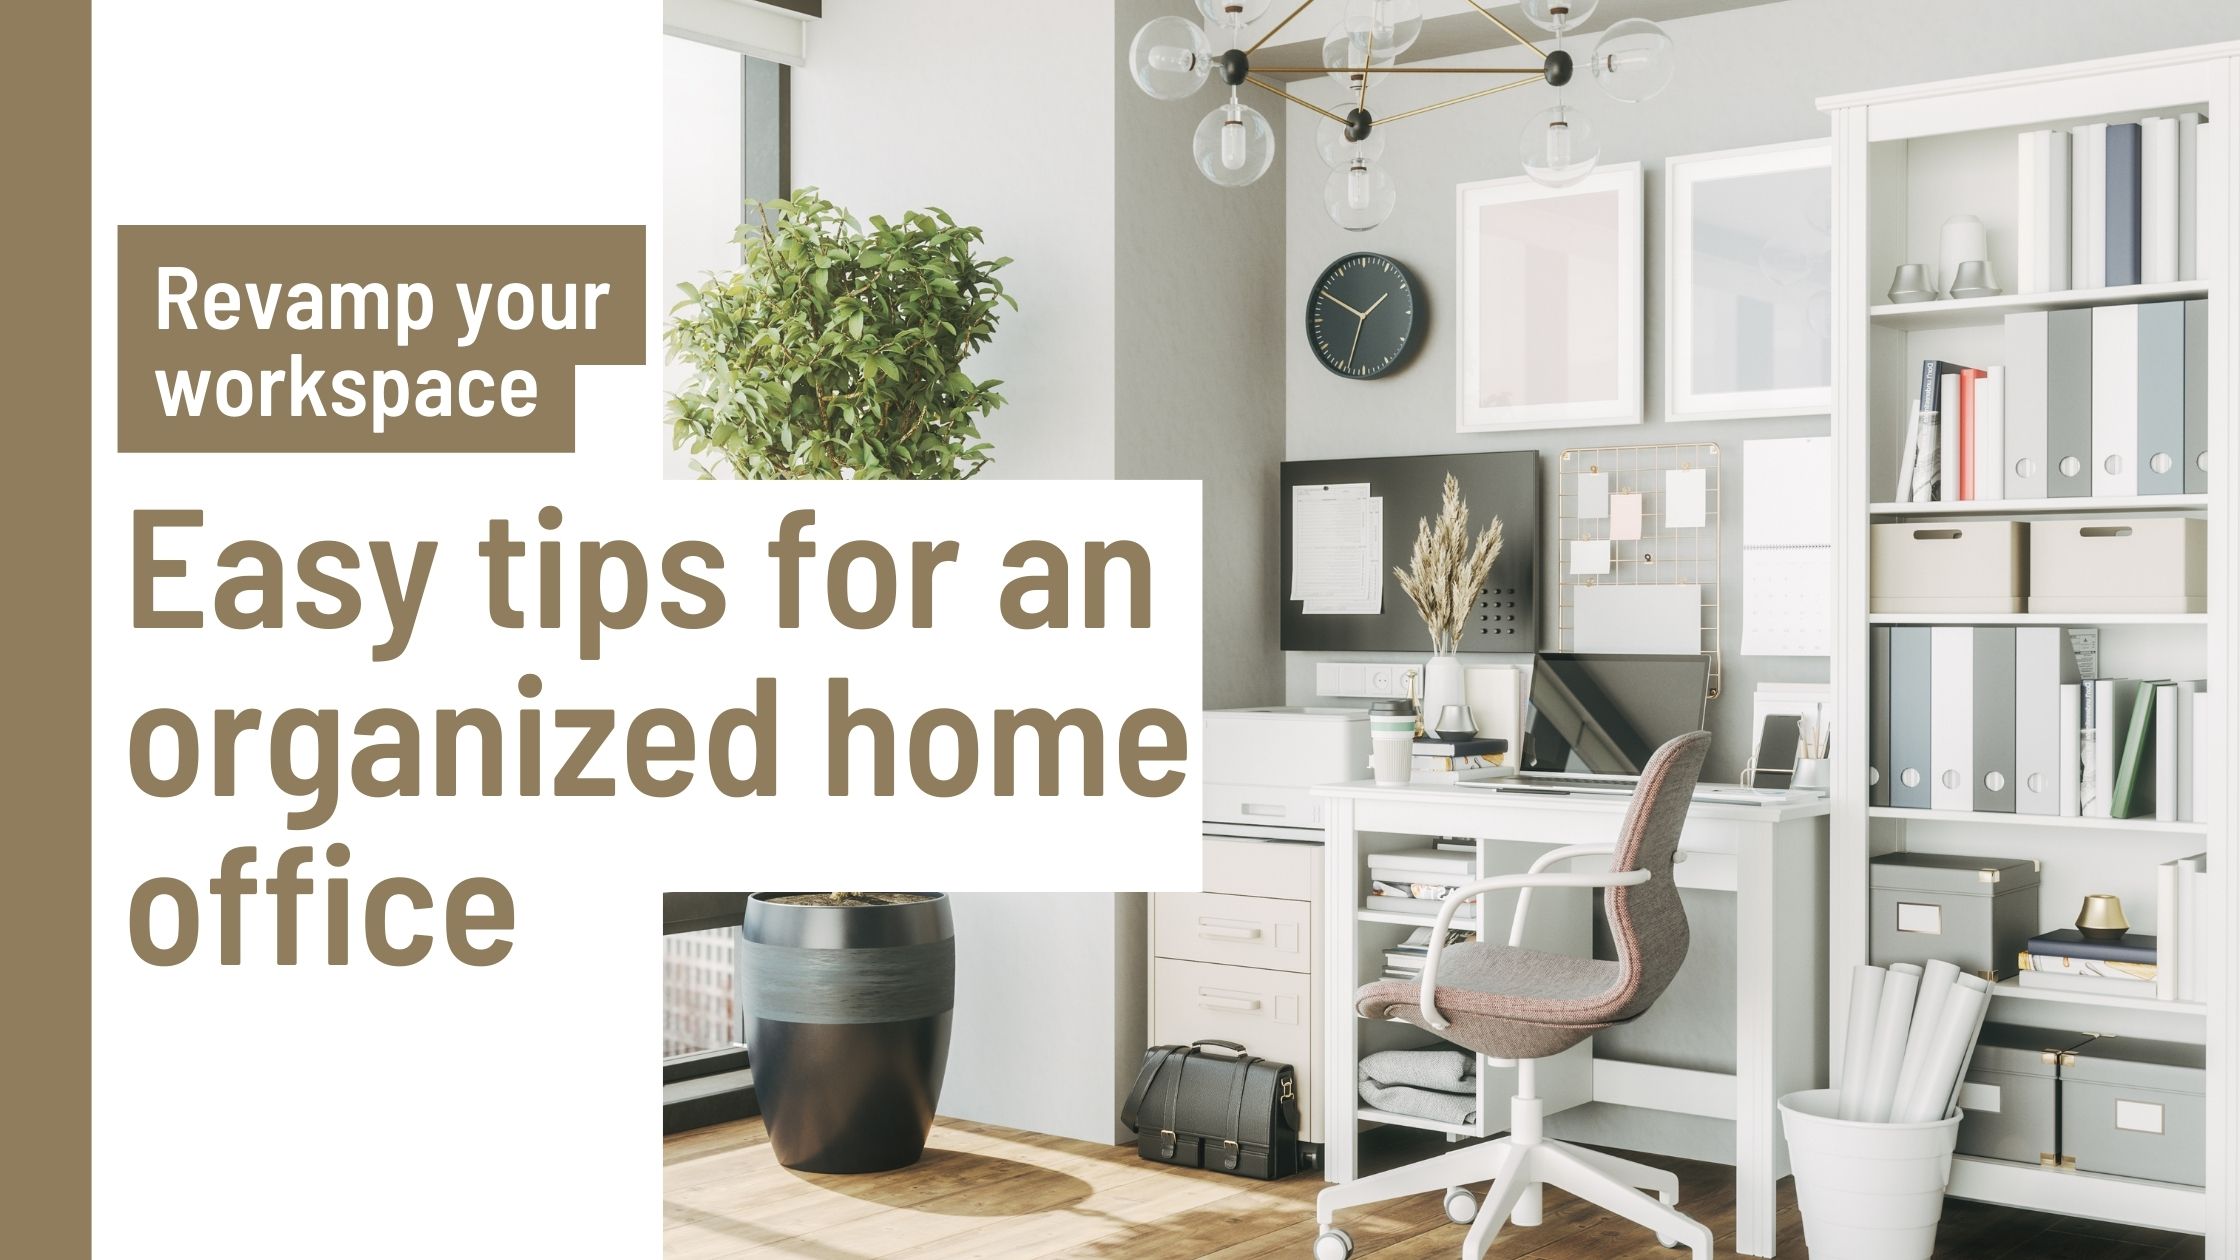 Revamp your workspace: Easy tips for an organized home office